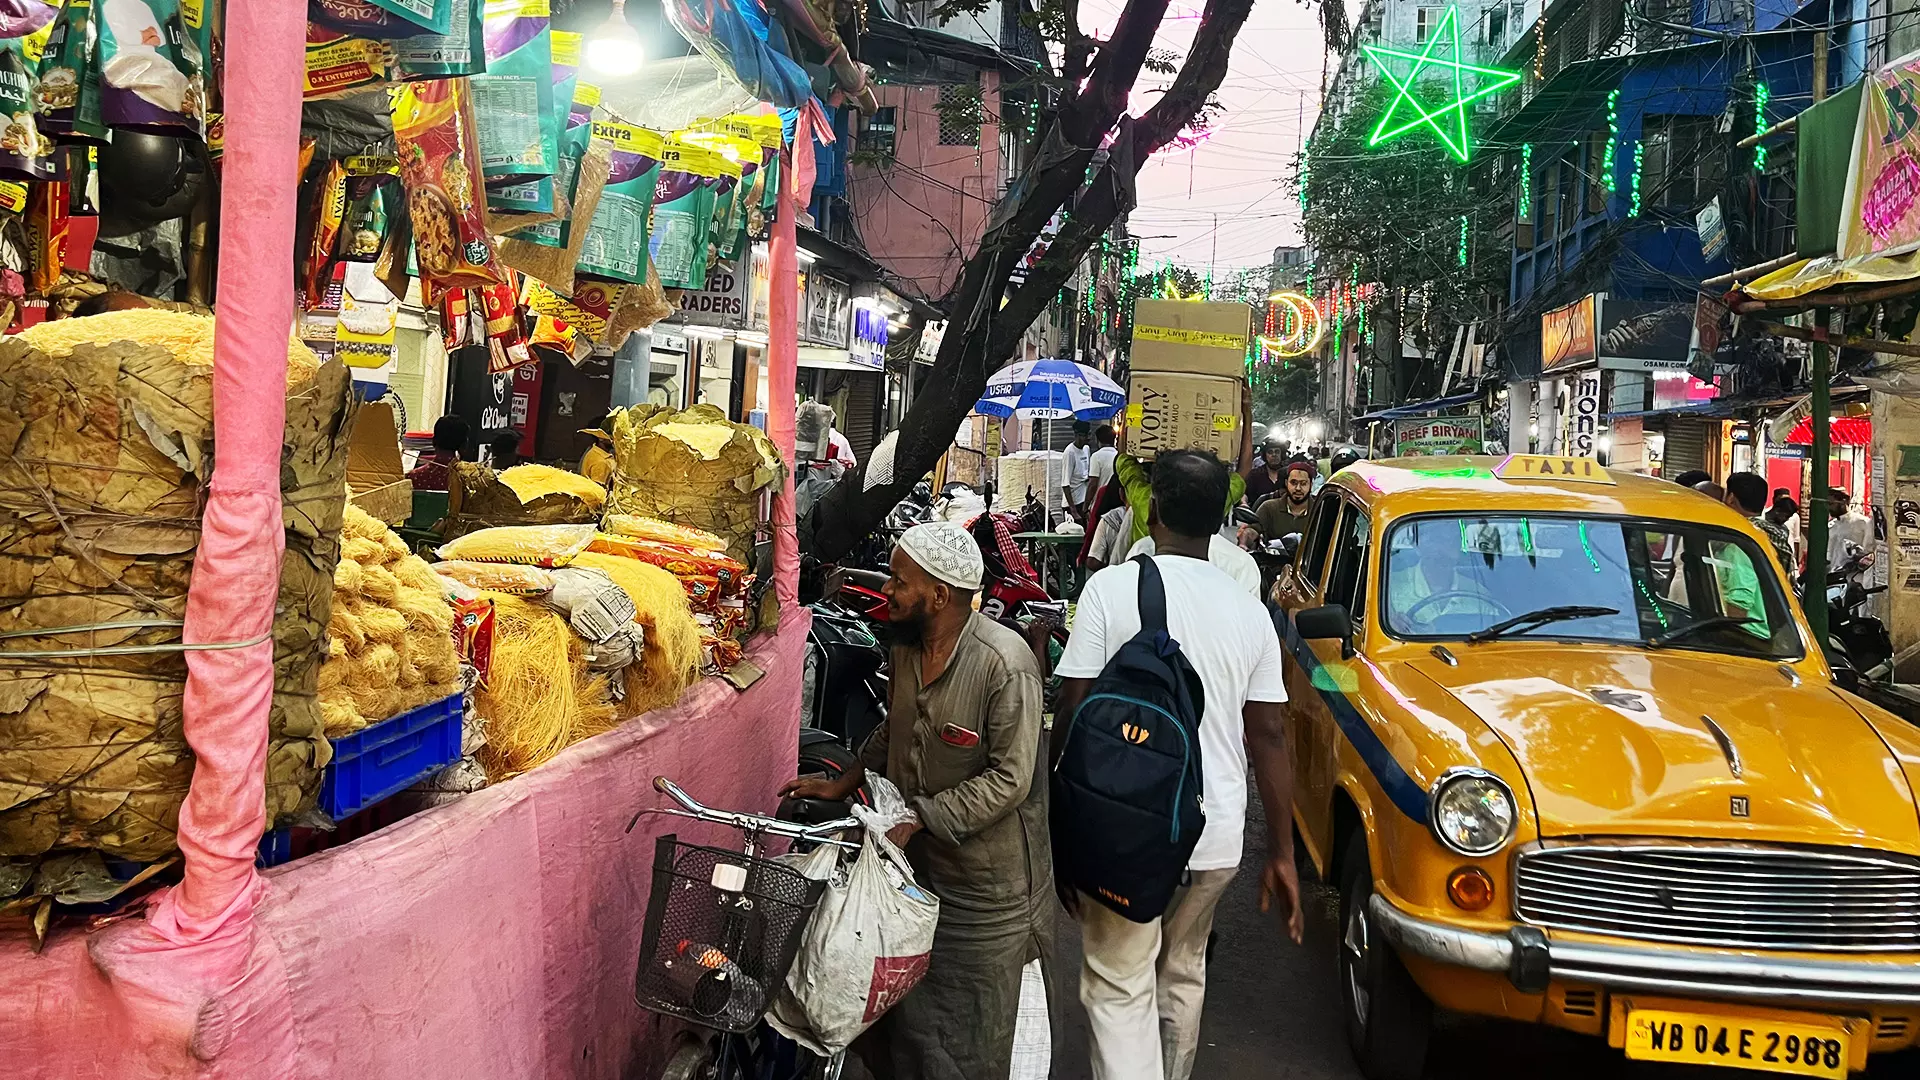 Though it was initially developed as a residential area, today Zakaria Street is one of the busiest commercial hubs of the city, particularly known for restaurants serving delectable Mughal cuisines.